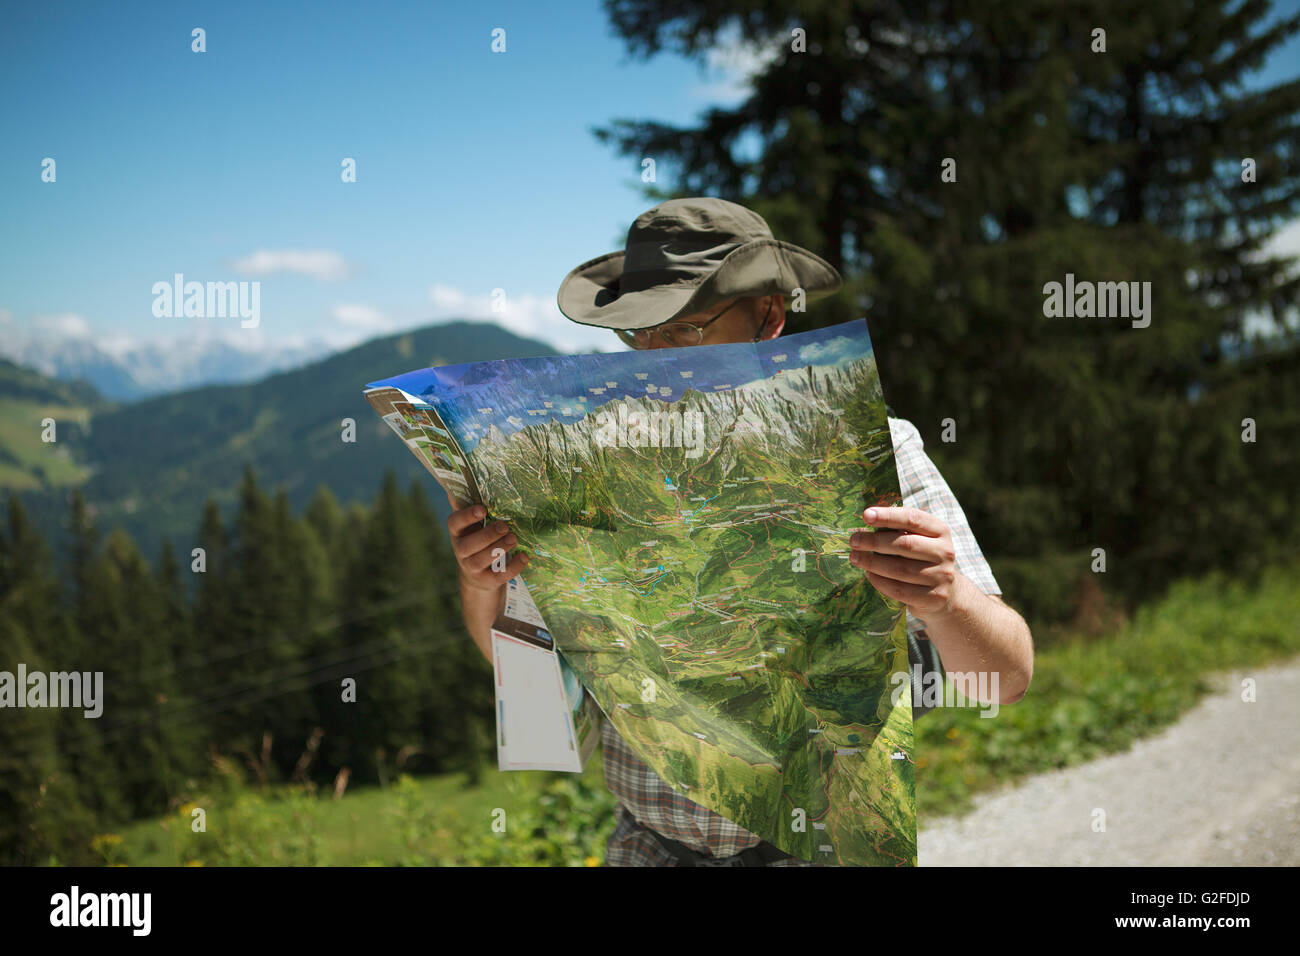 Man in Hiking gear studying a map looking for the direction while hiking in the european alps Stock Photo